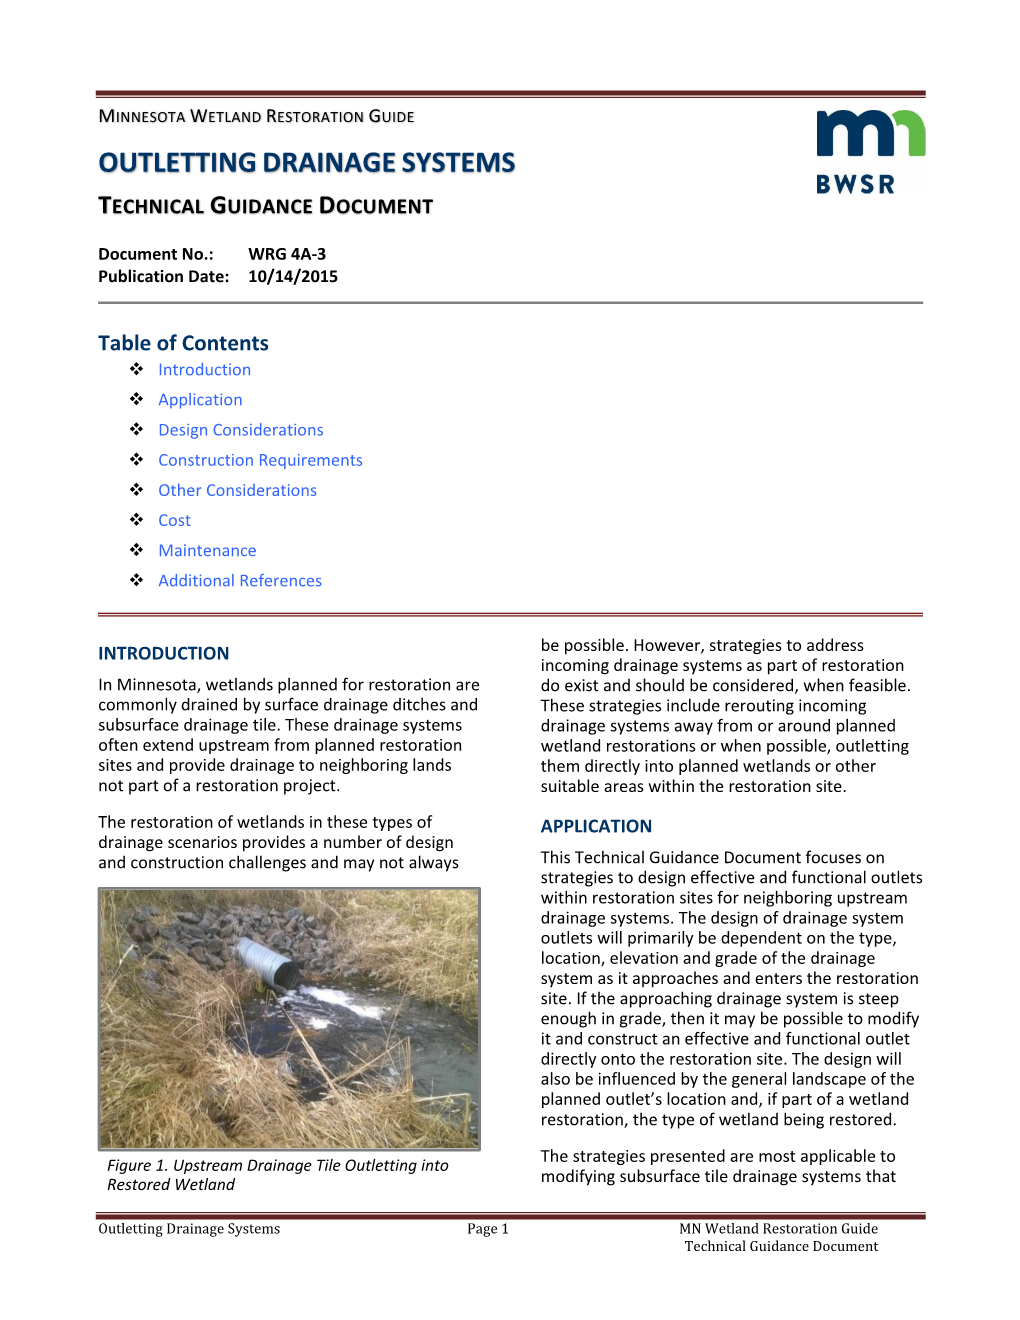 Outlettingdrainagesystems